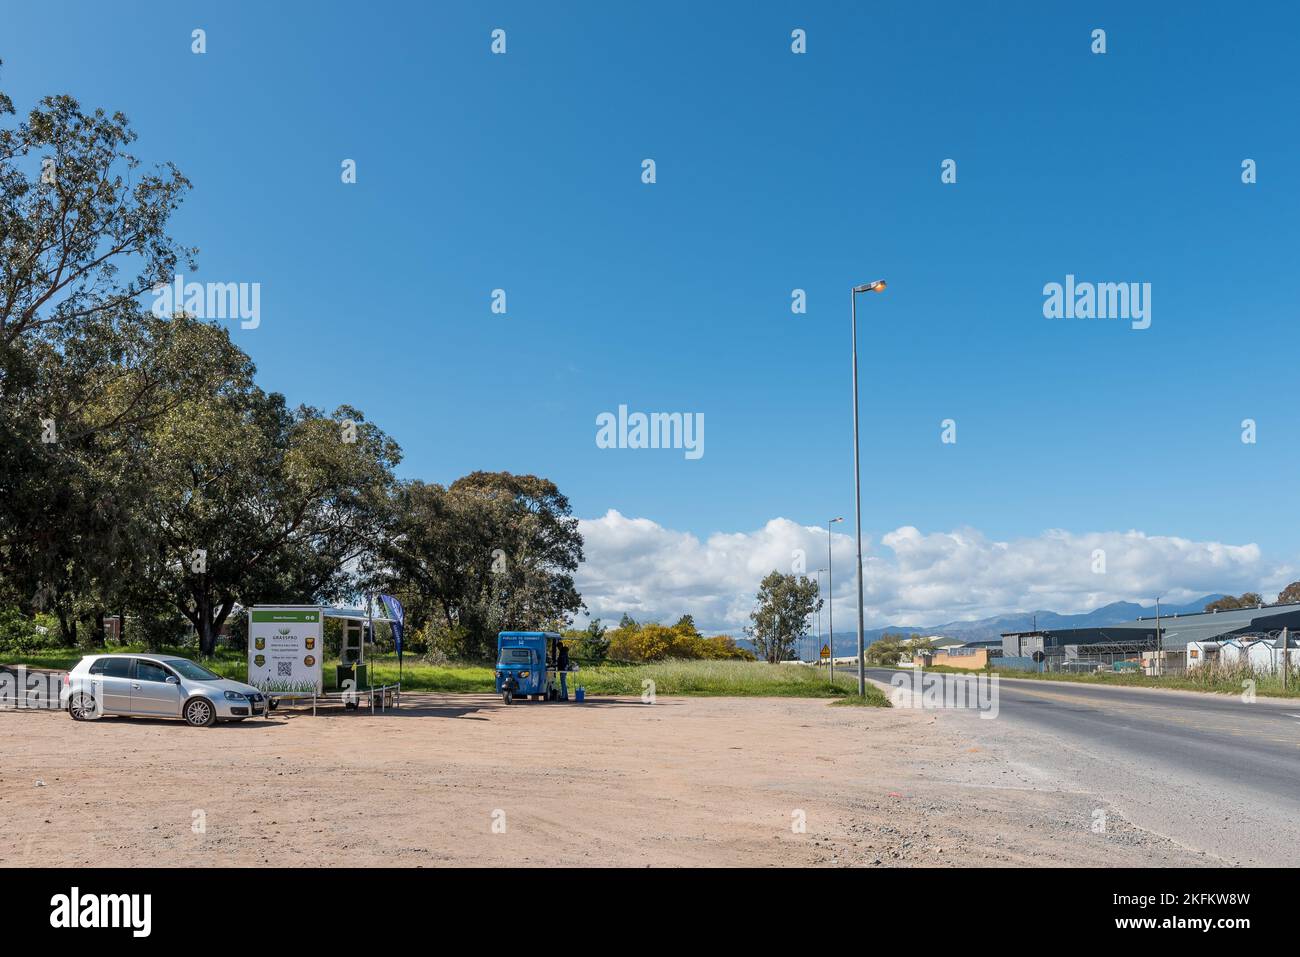 Somerset West, South Africa - Sep 19, 2022: A street scene in Main Road in Somerset West in the Western Cape Province. Two mobile kiosks and vehicles Stock Photo